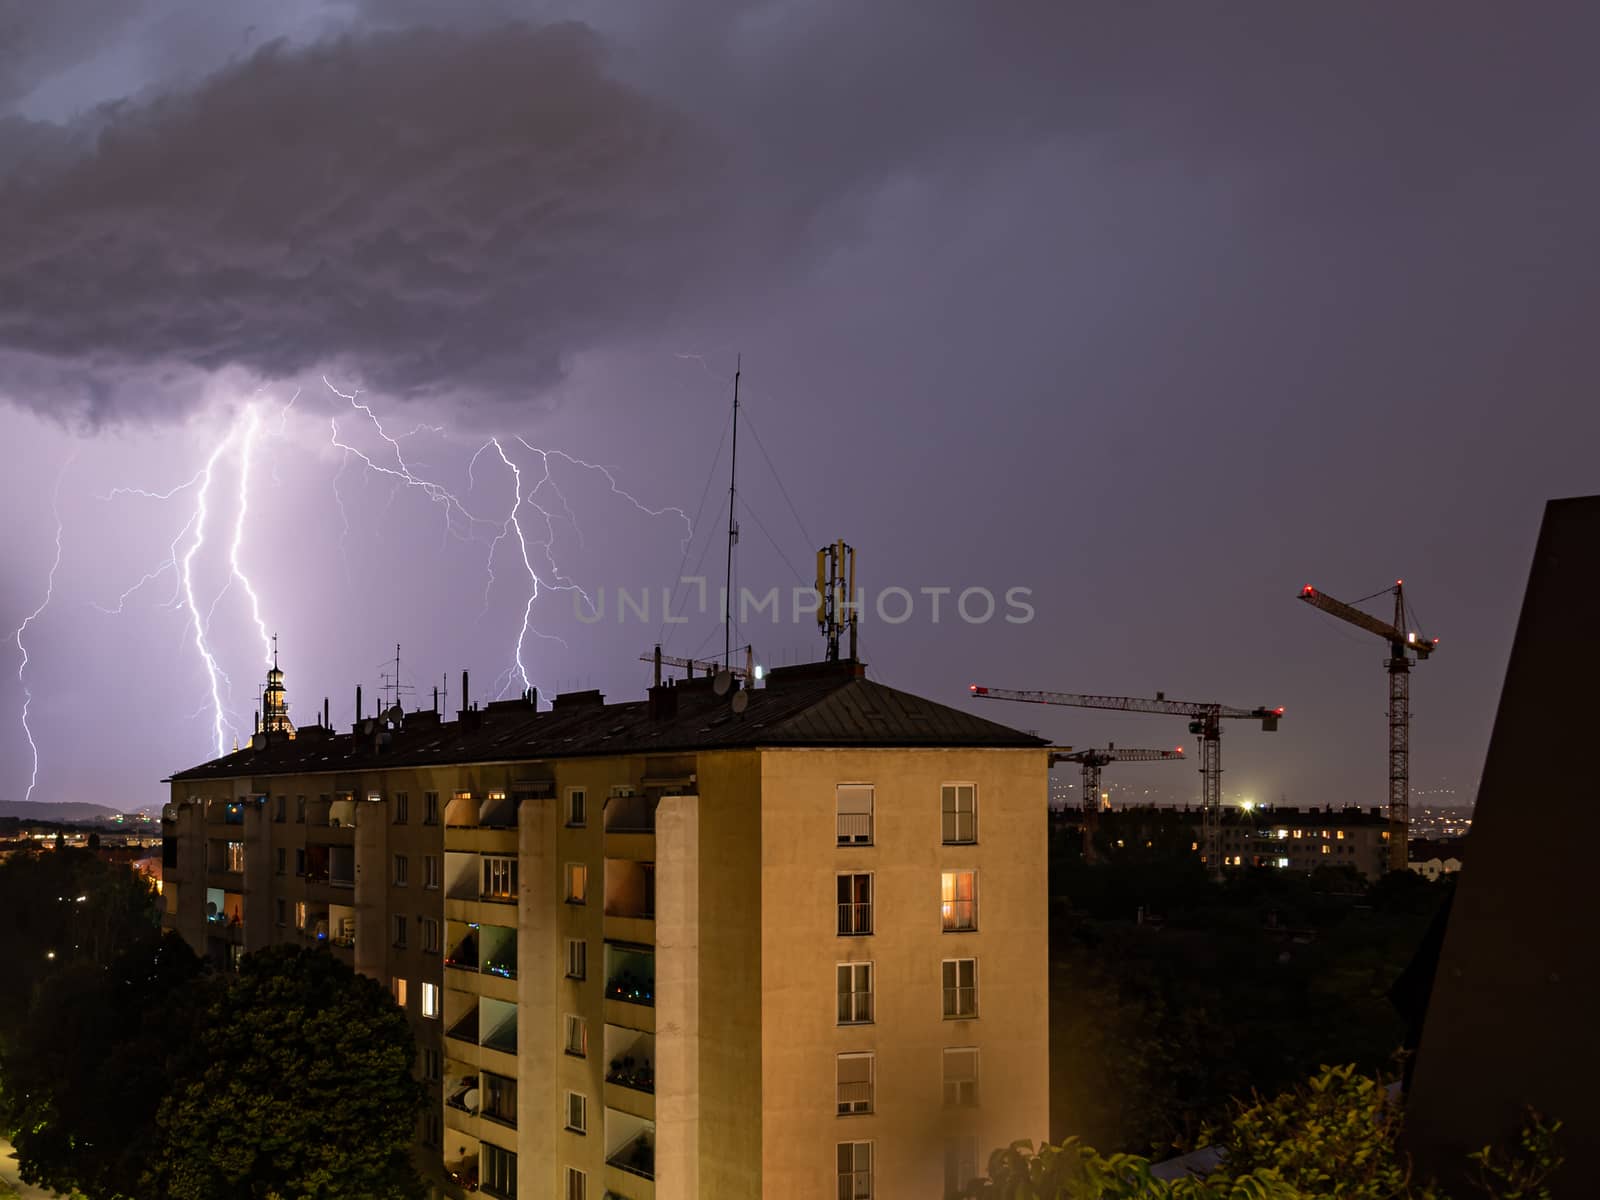 Violent summer thunderstorm with enormous lightning over the Wienerberg City in Vienna with construction cranes on the right side of the picture by Umtsga